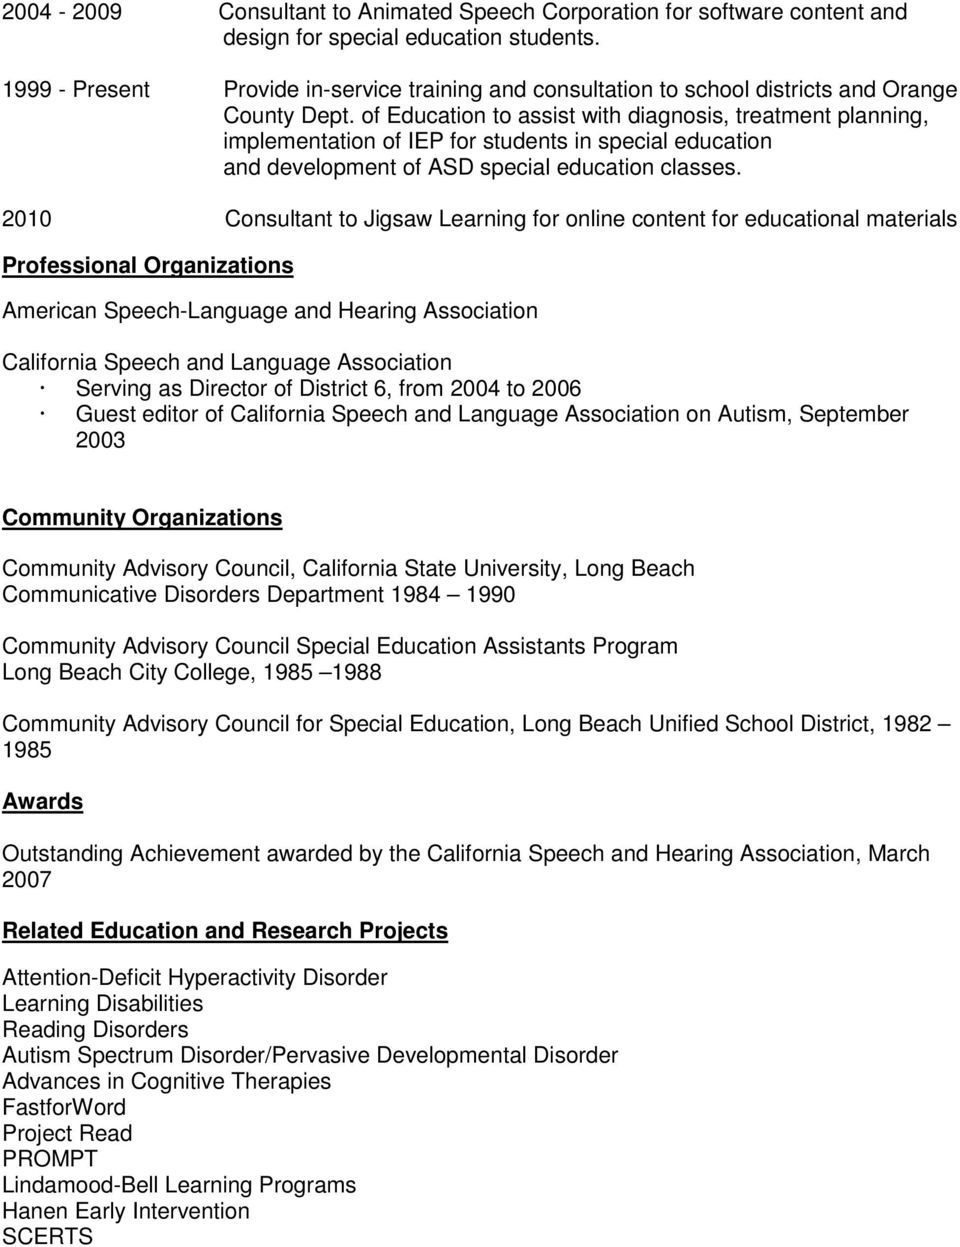 of Education to assist with diagnosis, treatment planning, implementation of IEP for students in special education and development of ASD special education classes.